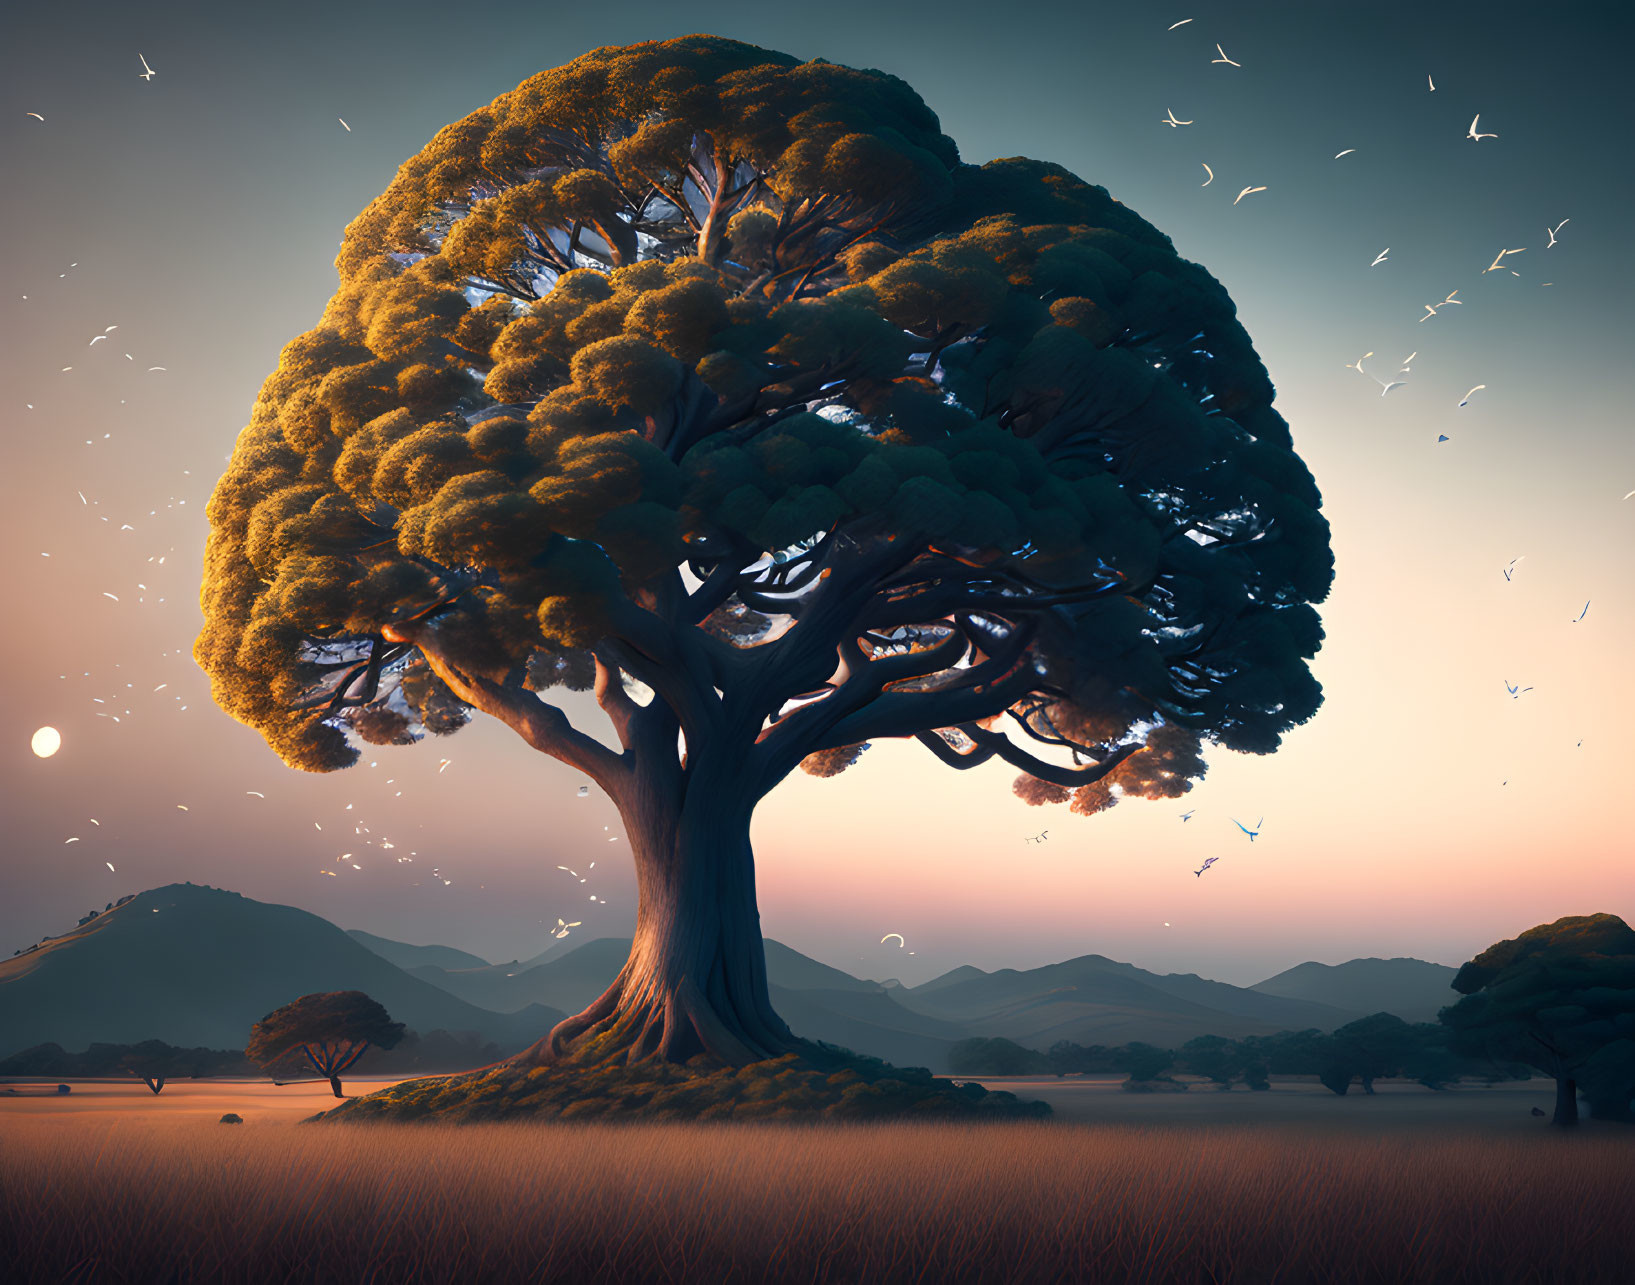 Majestic tree with thick trunk and lush canopy in serene field at dusk